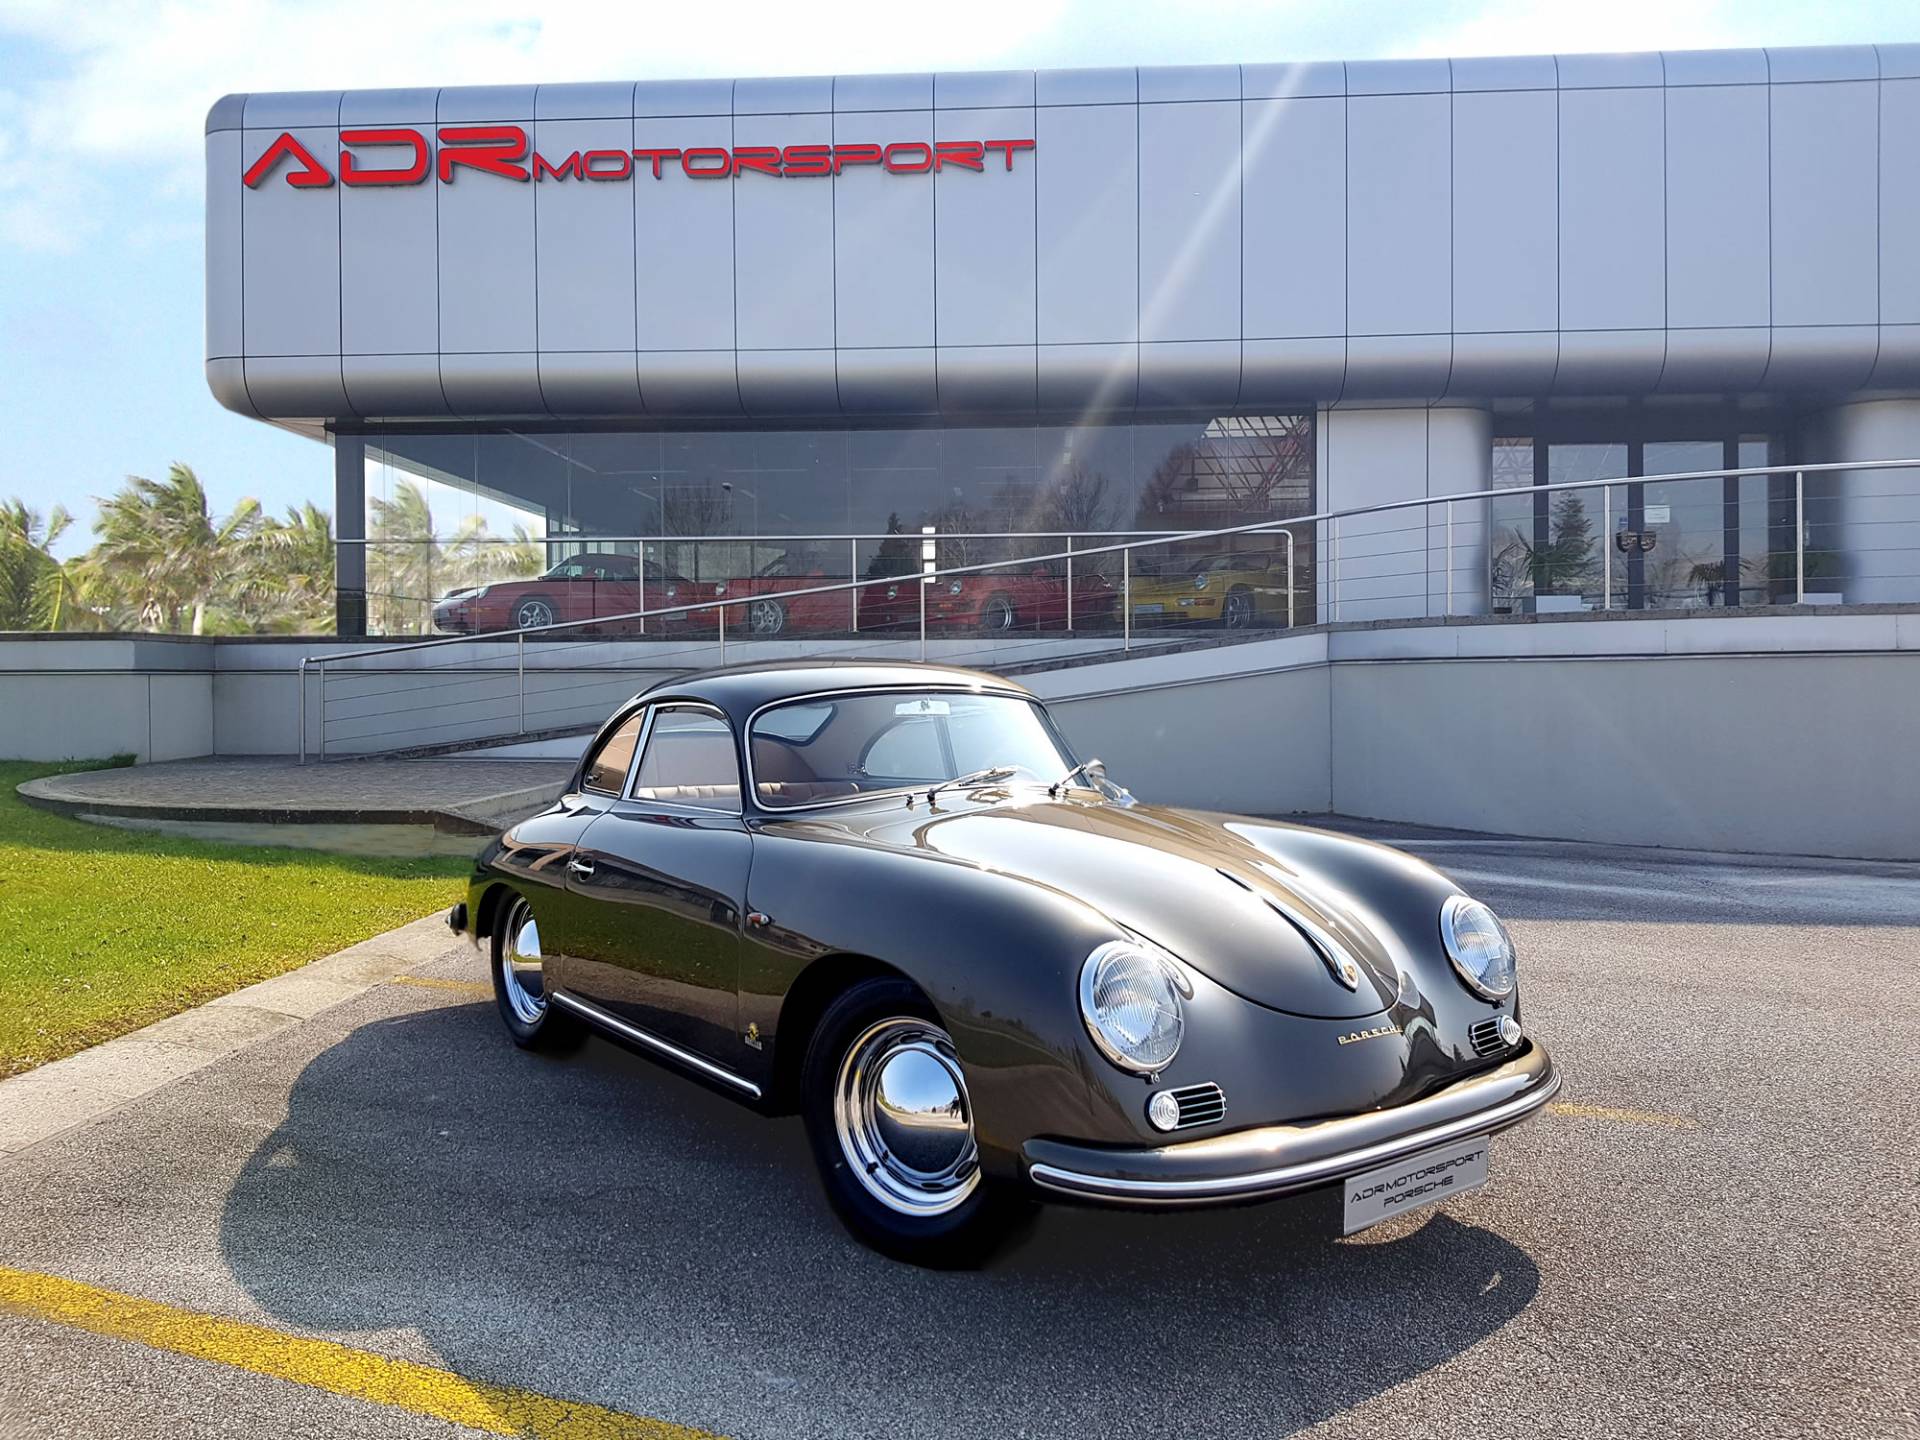 For Sale: Porsche 356 A 1600 (1956) offered for GBP 156,616